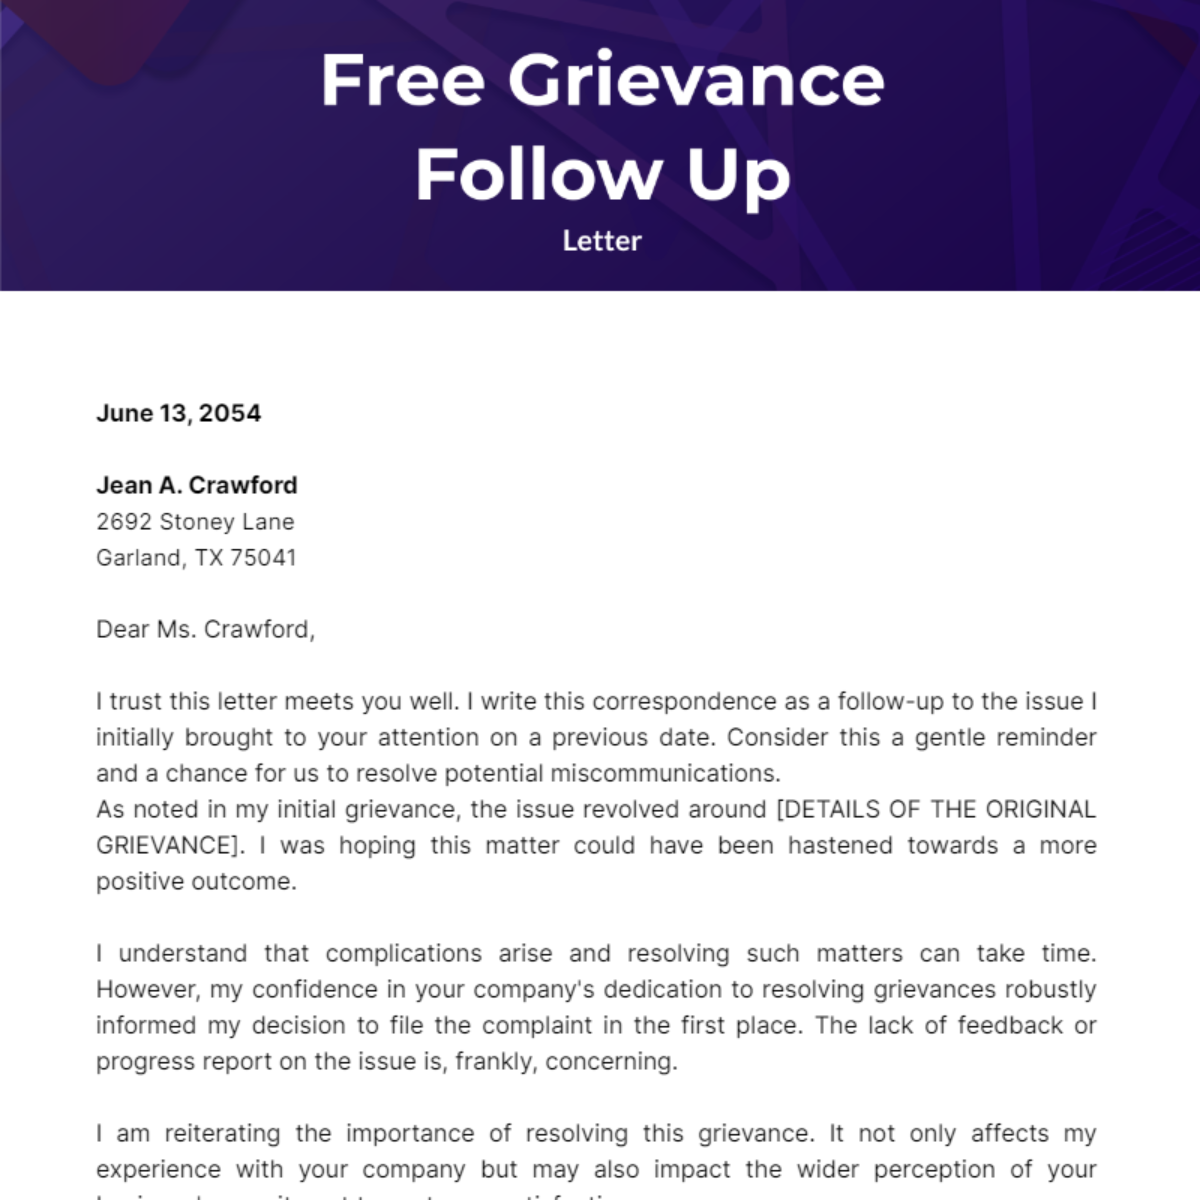 Grievance Follow Up Letter Template